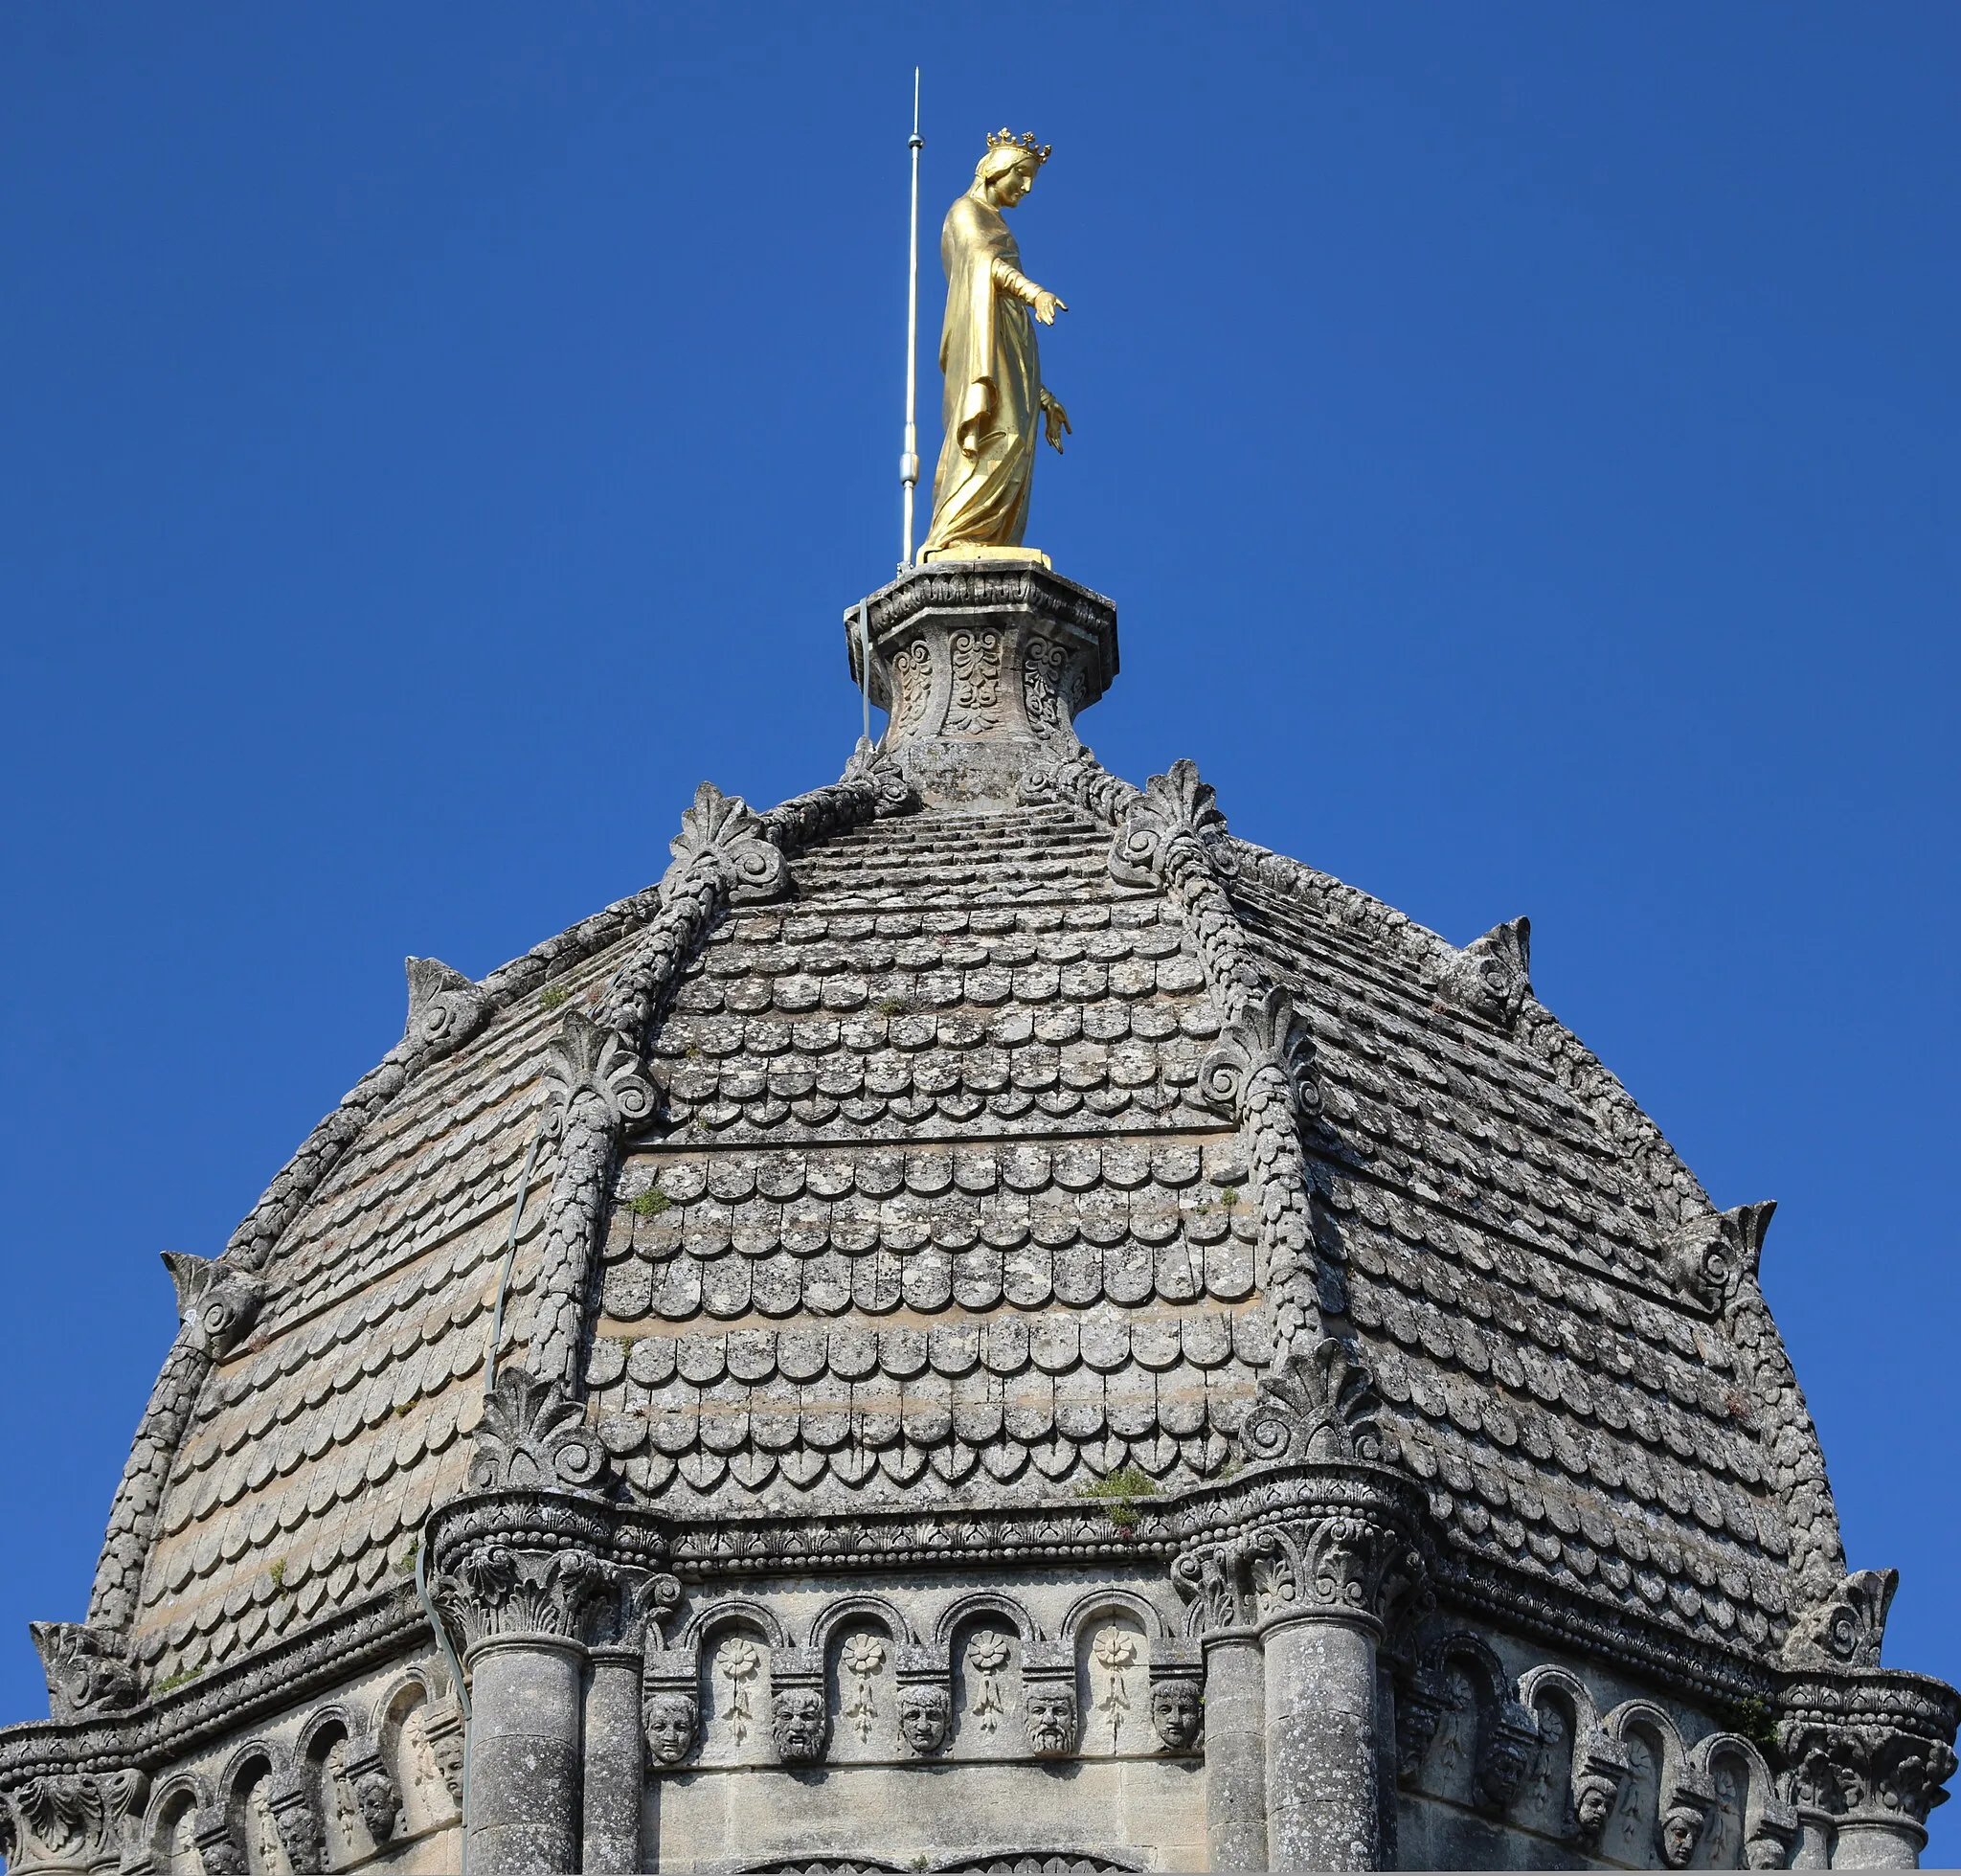 Photo showing: The roof of the Our Lady chapel of Forcalquier, France.